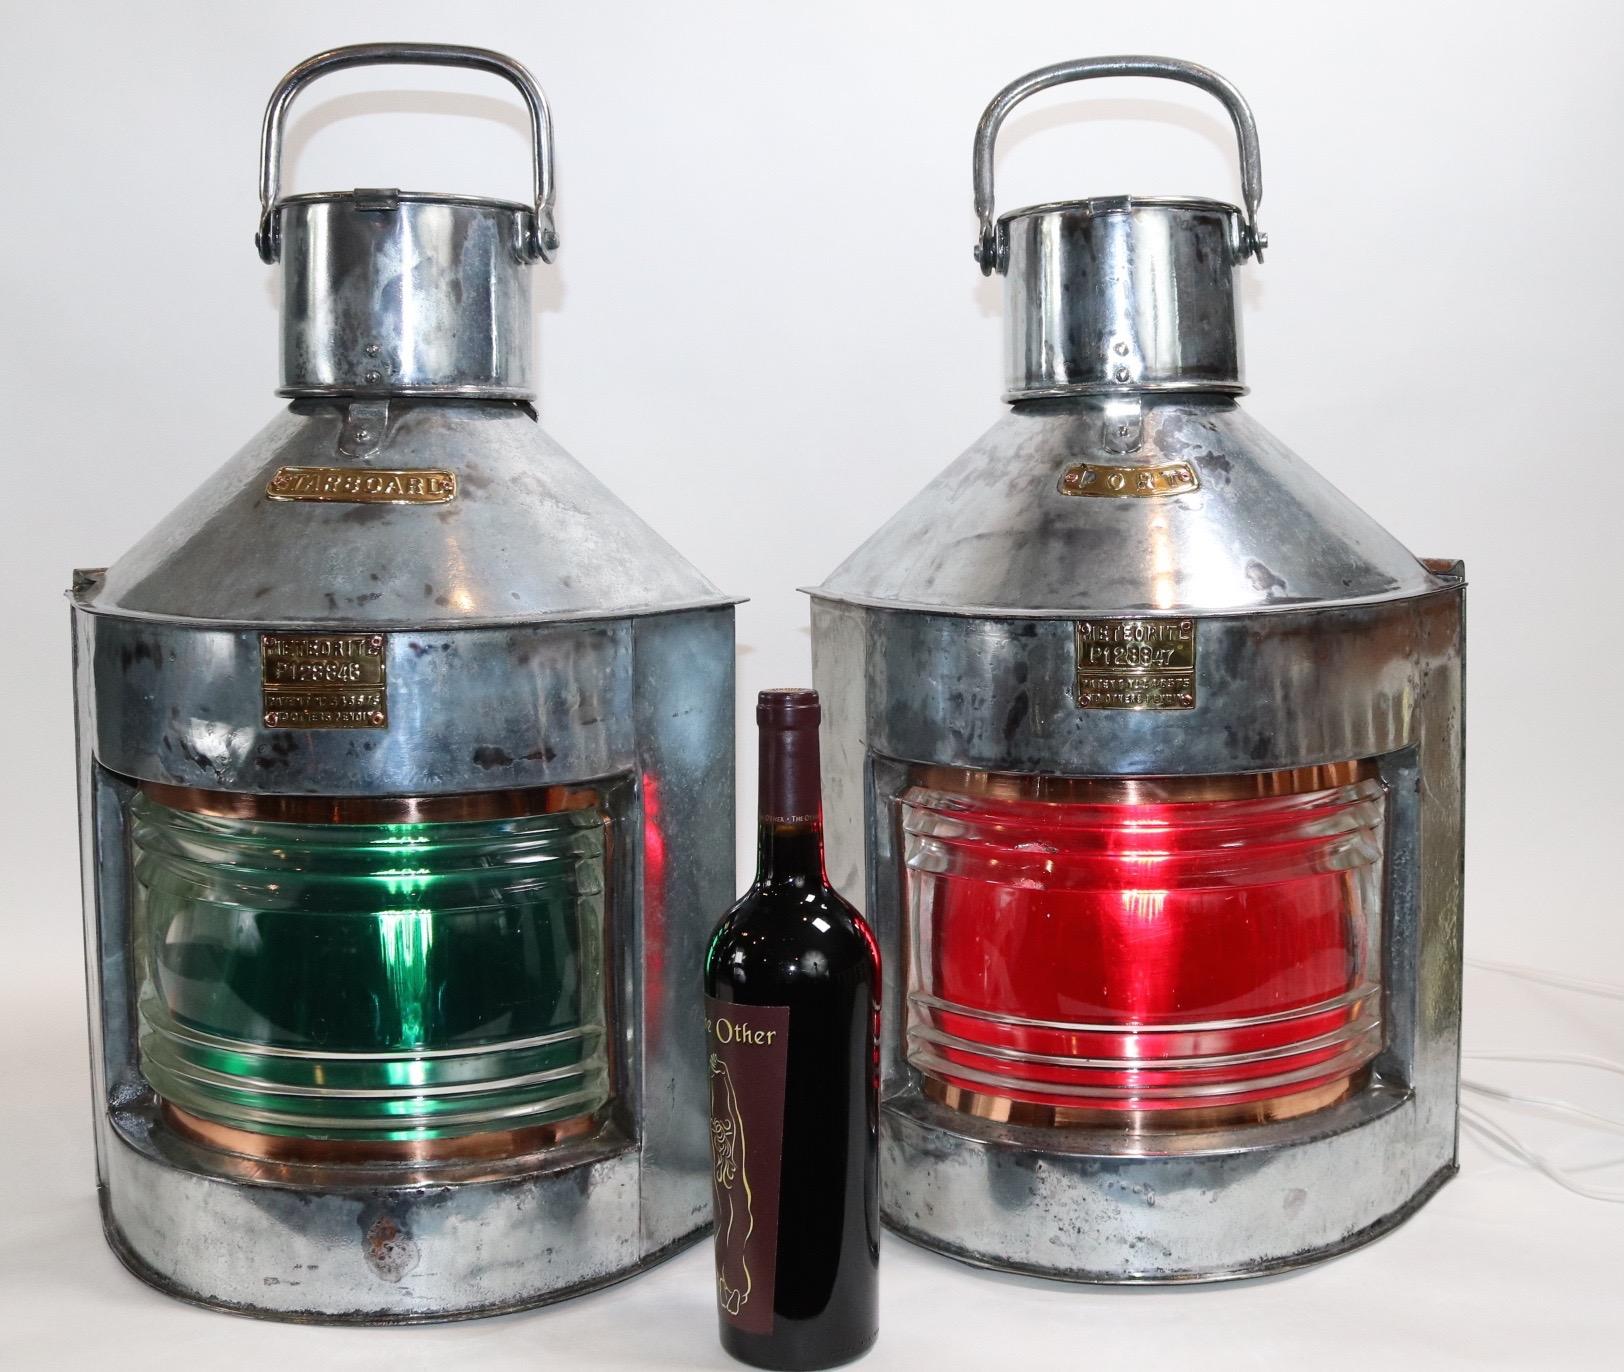 Substantial pair of port and starboard ships lanterns by the English firm Meteorite. With clear Fresnel lenses backed by red and green filters. The steel cases have been stripped and polished. With brass maker badges with sequential serial numbers.